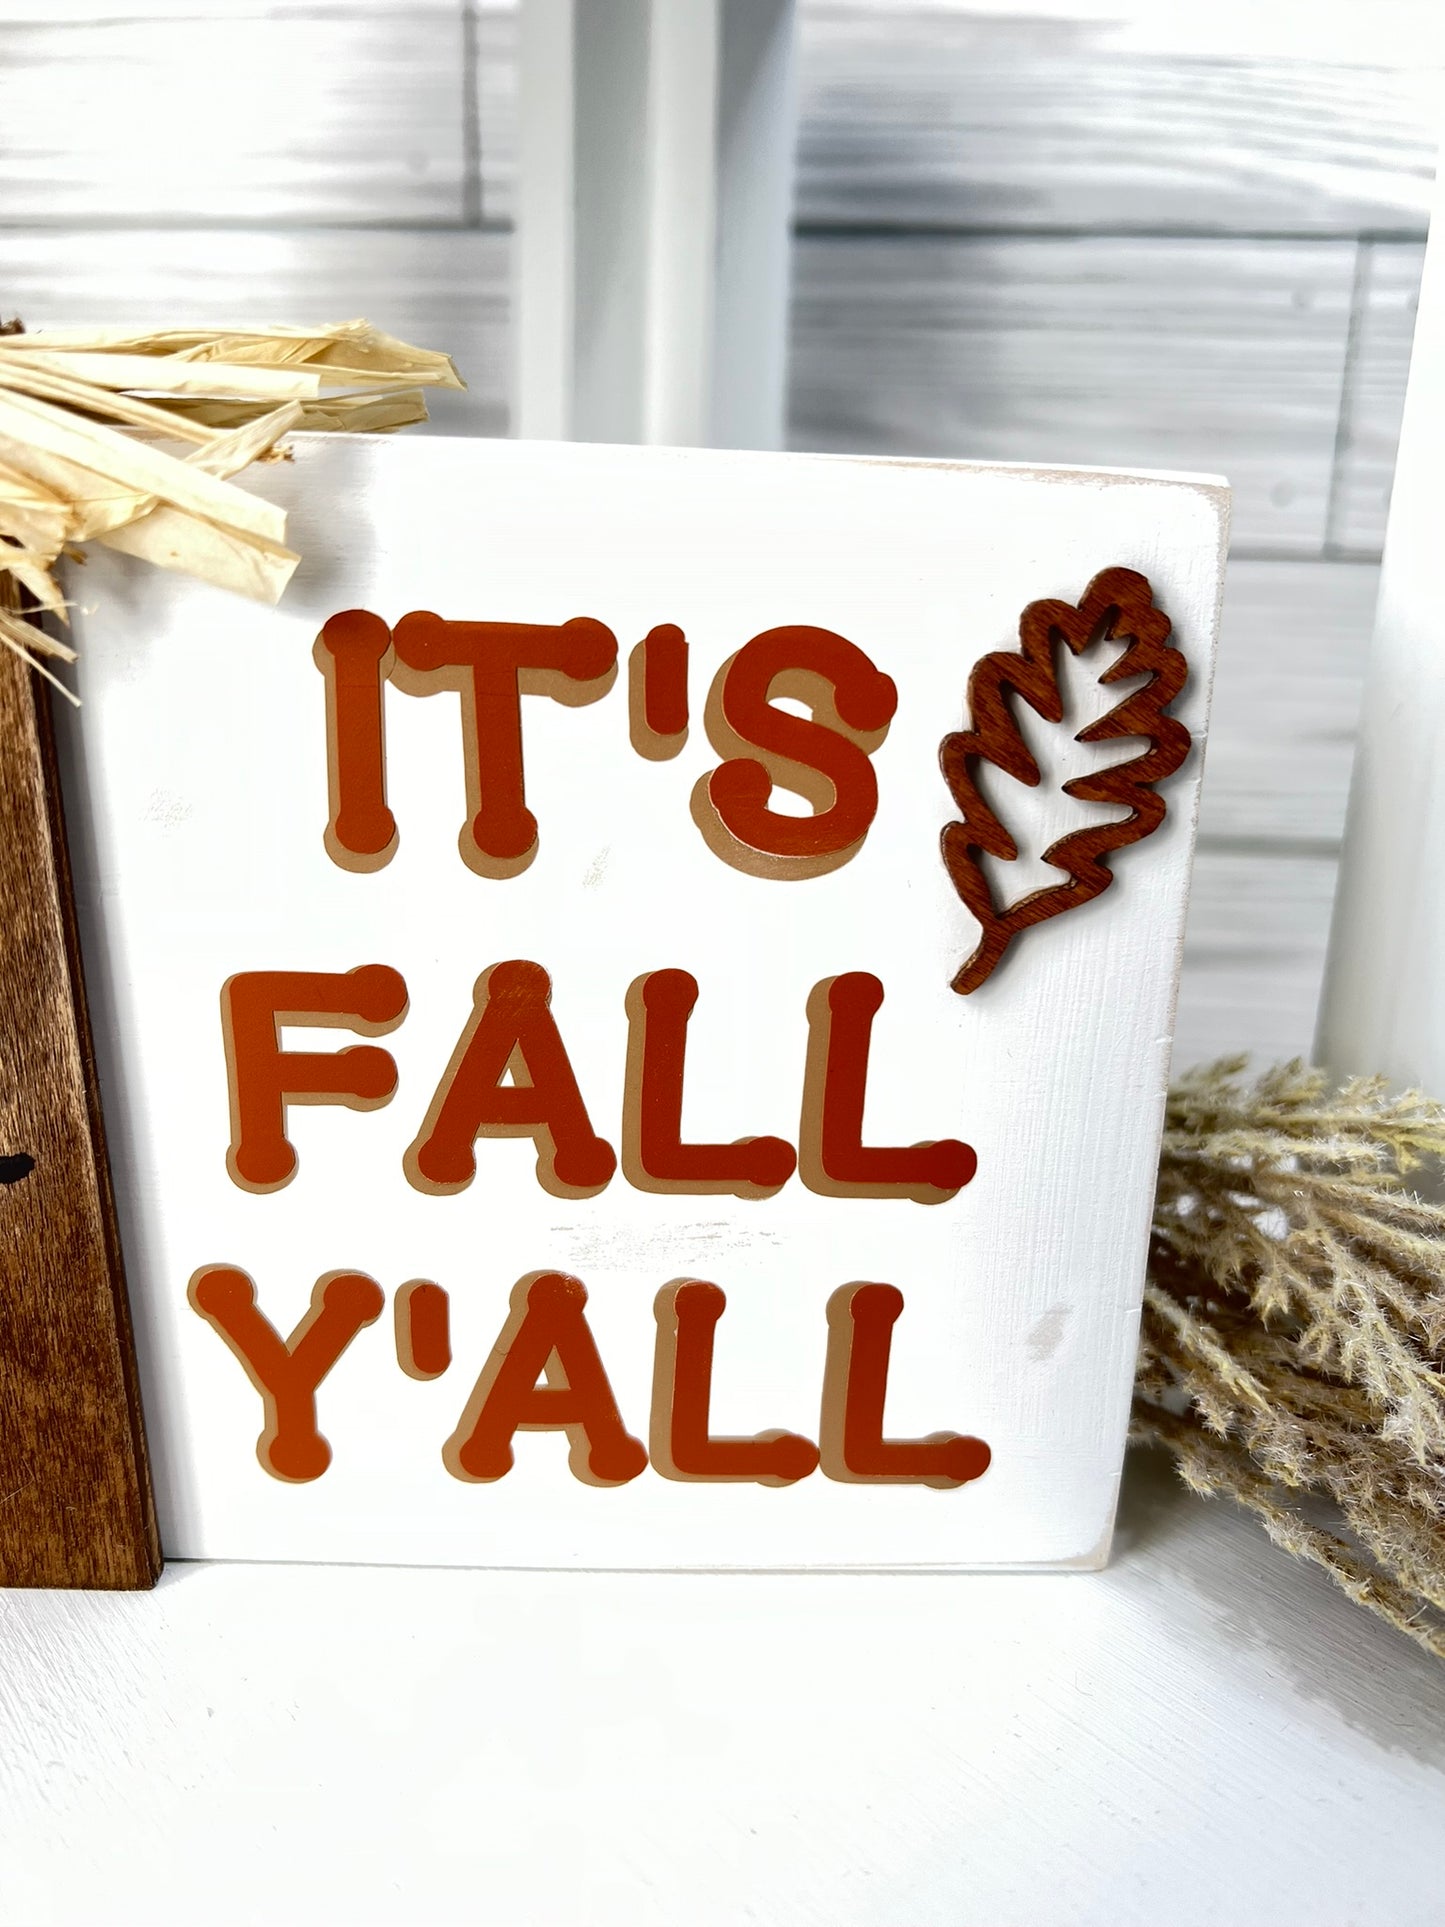 It's Fall Y'all Scarecrow Sign